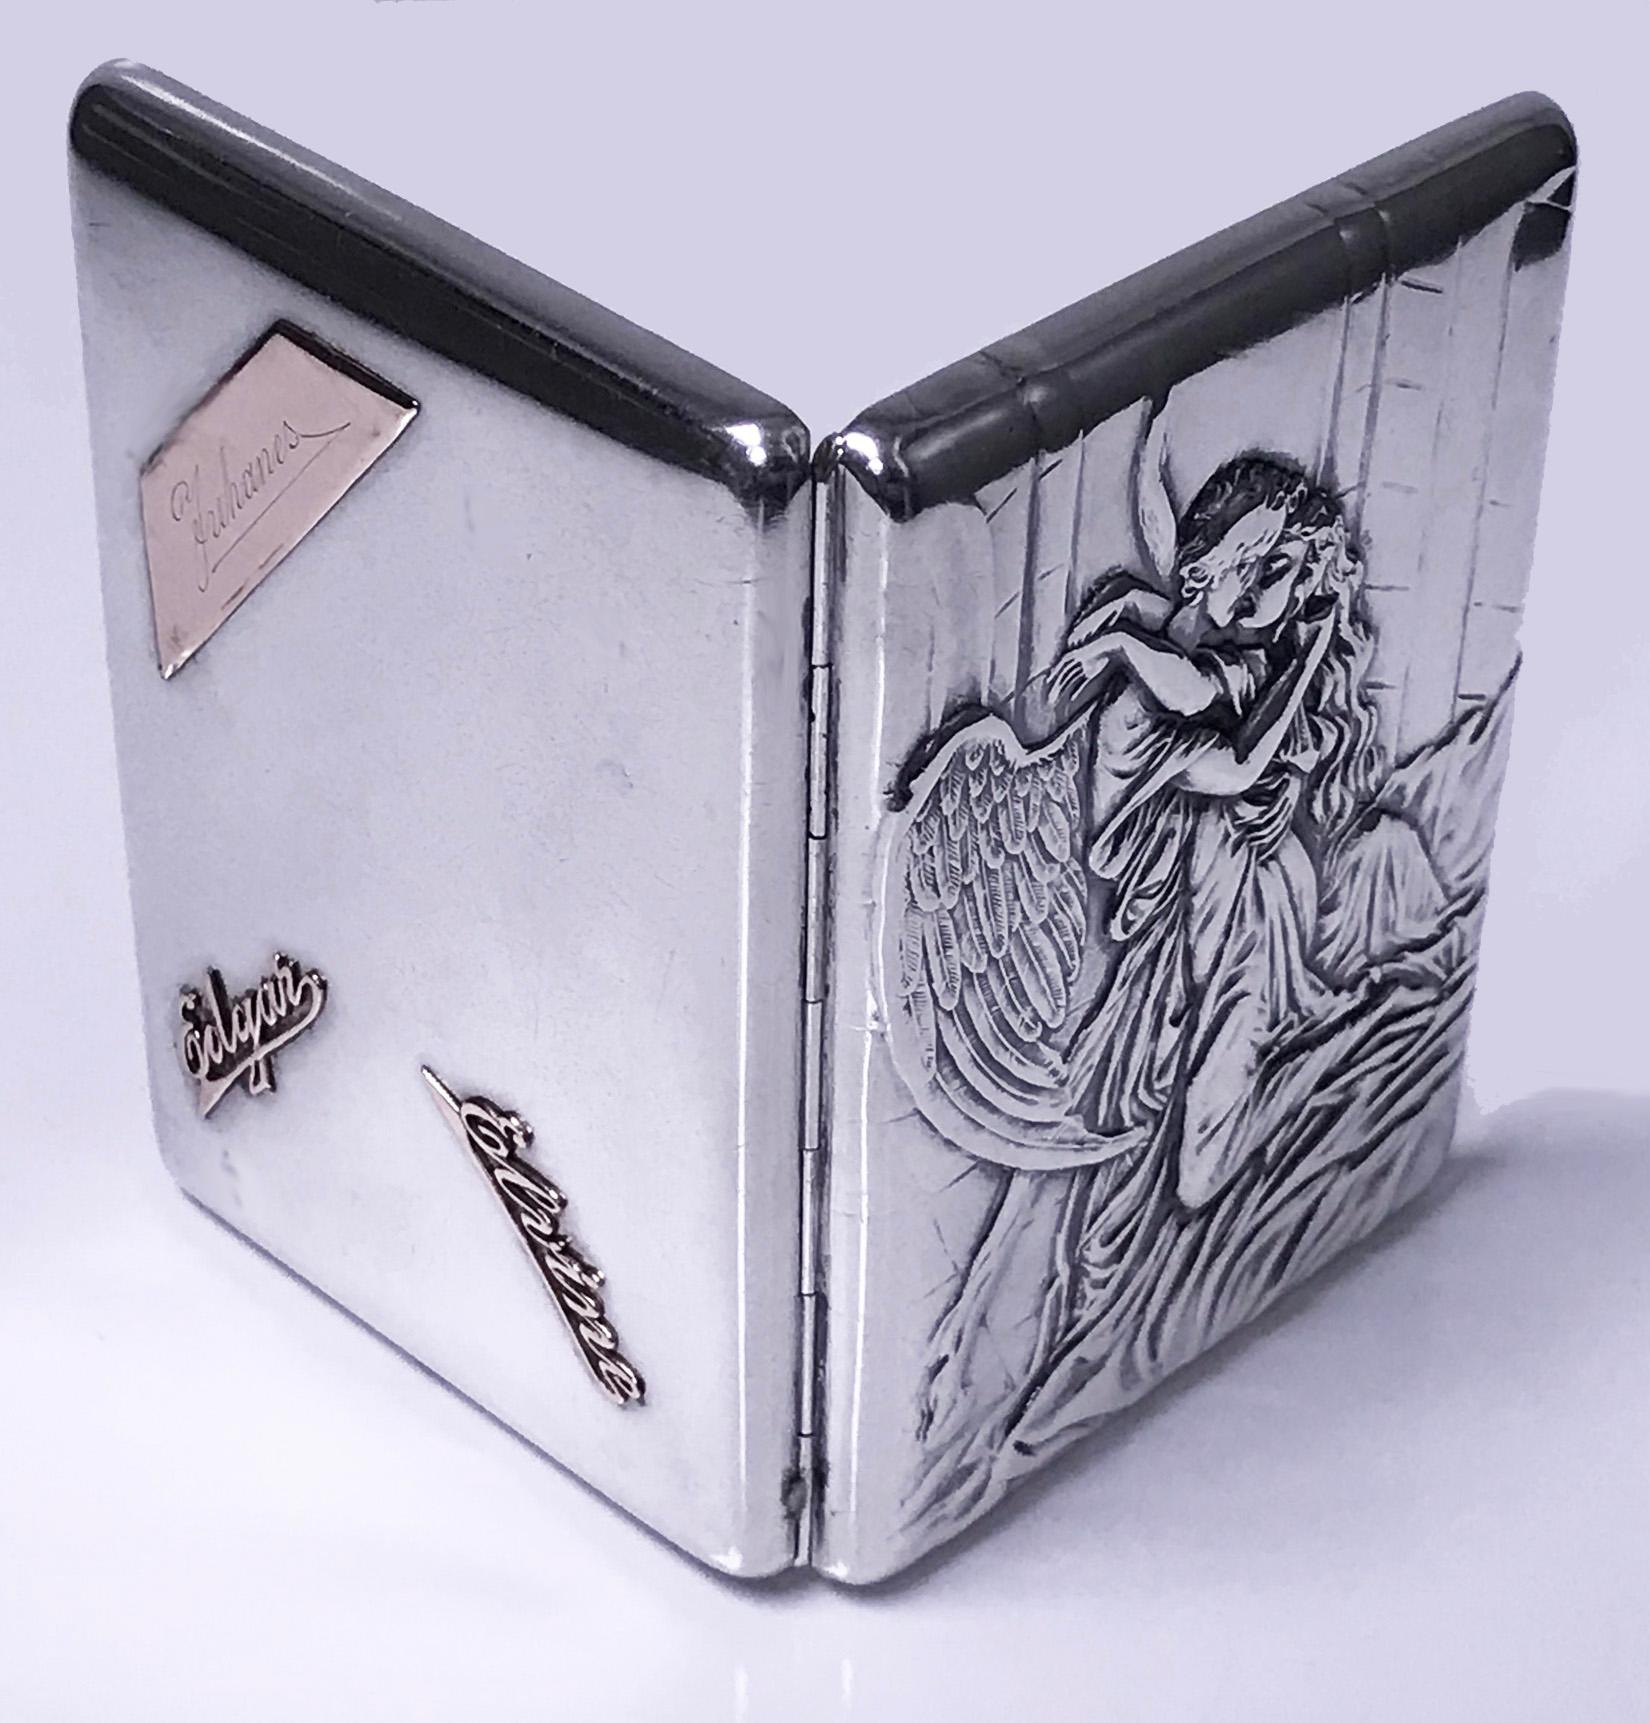 Russian Silver Cigarette Case Box, Konstantin Skvortsov, Moscow 1887-1908 depicting Hermes Seduction of Aphrodite. The rectangular case with embossed raised relief depicting Hermes Seduction of Aphrodite, cabochon green stone thumb piece. The gilded